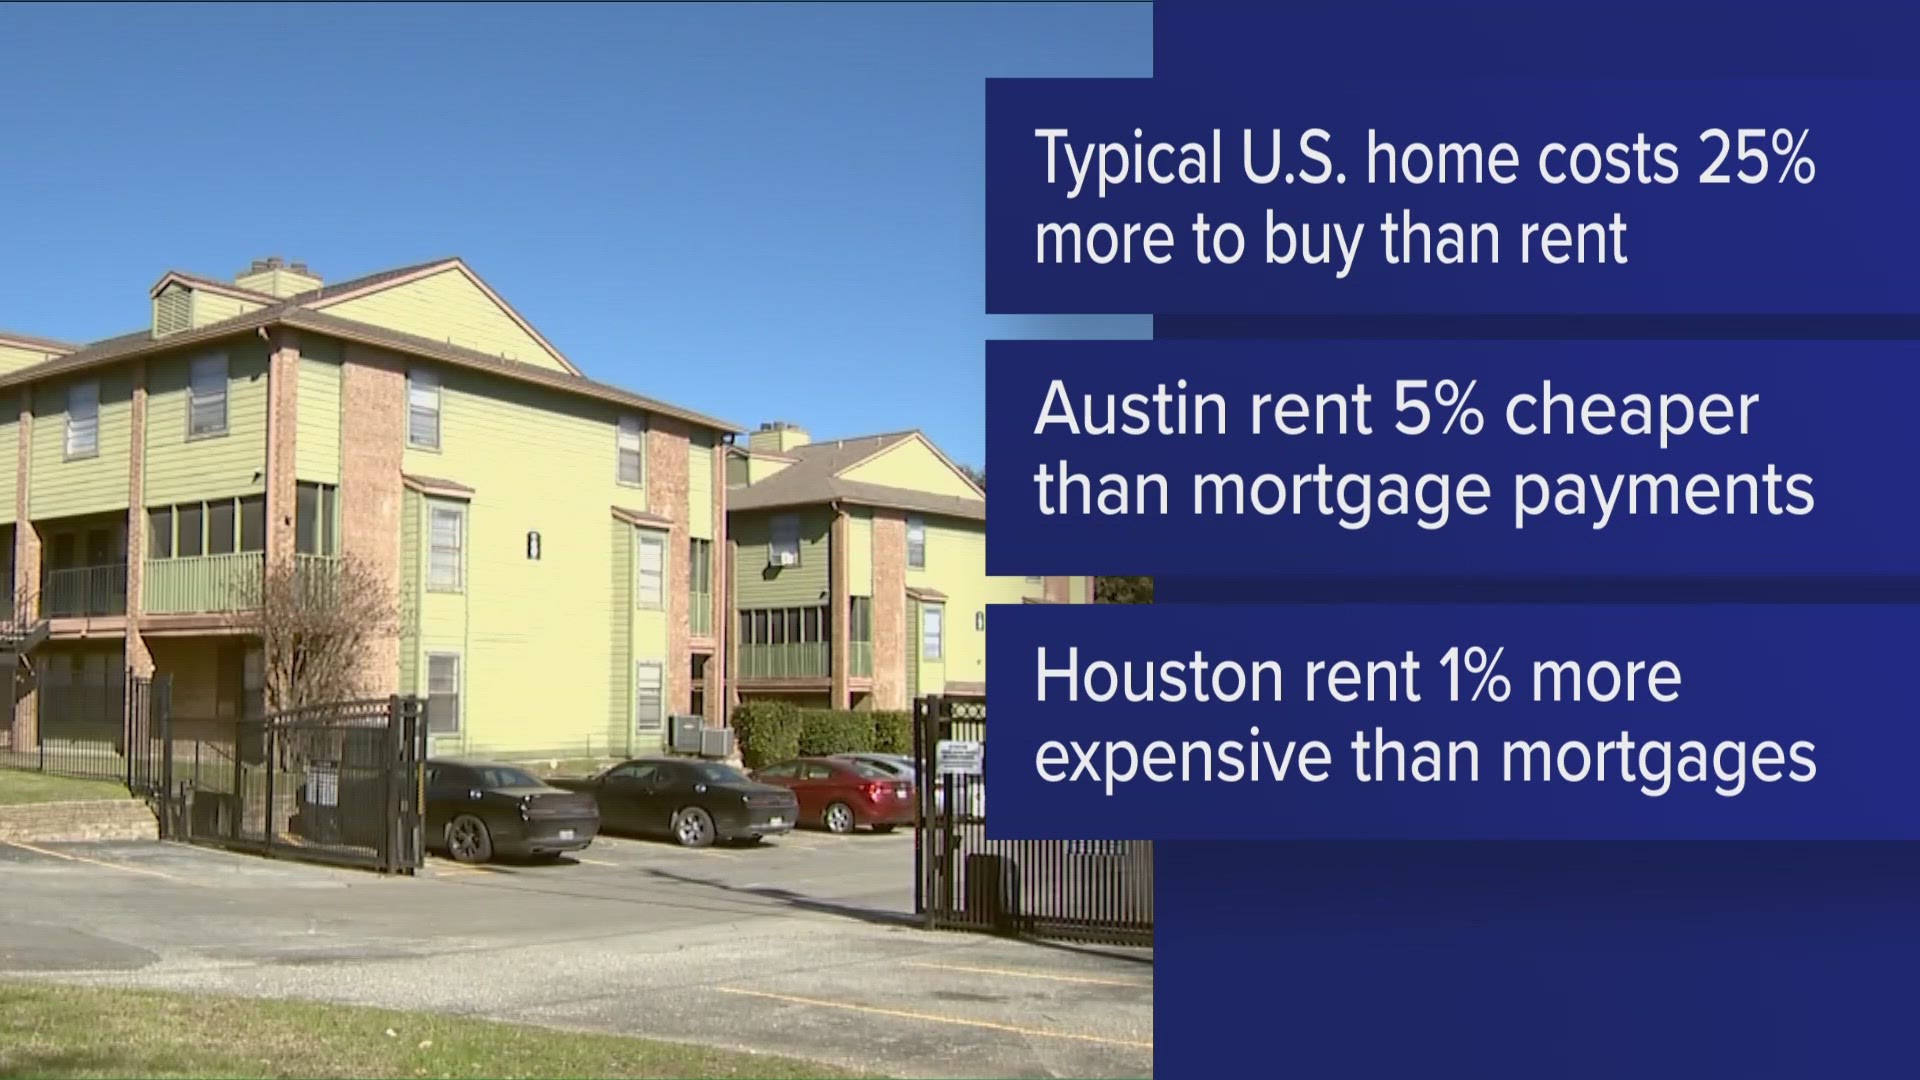 A new housing report says it's cheaper to rent than buy in Austin.